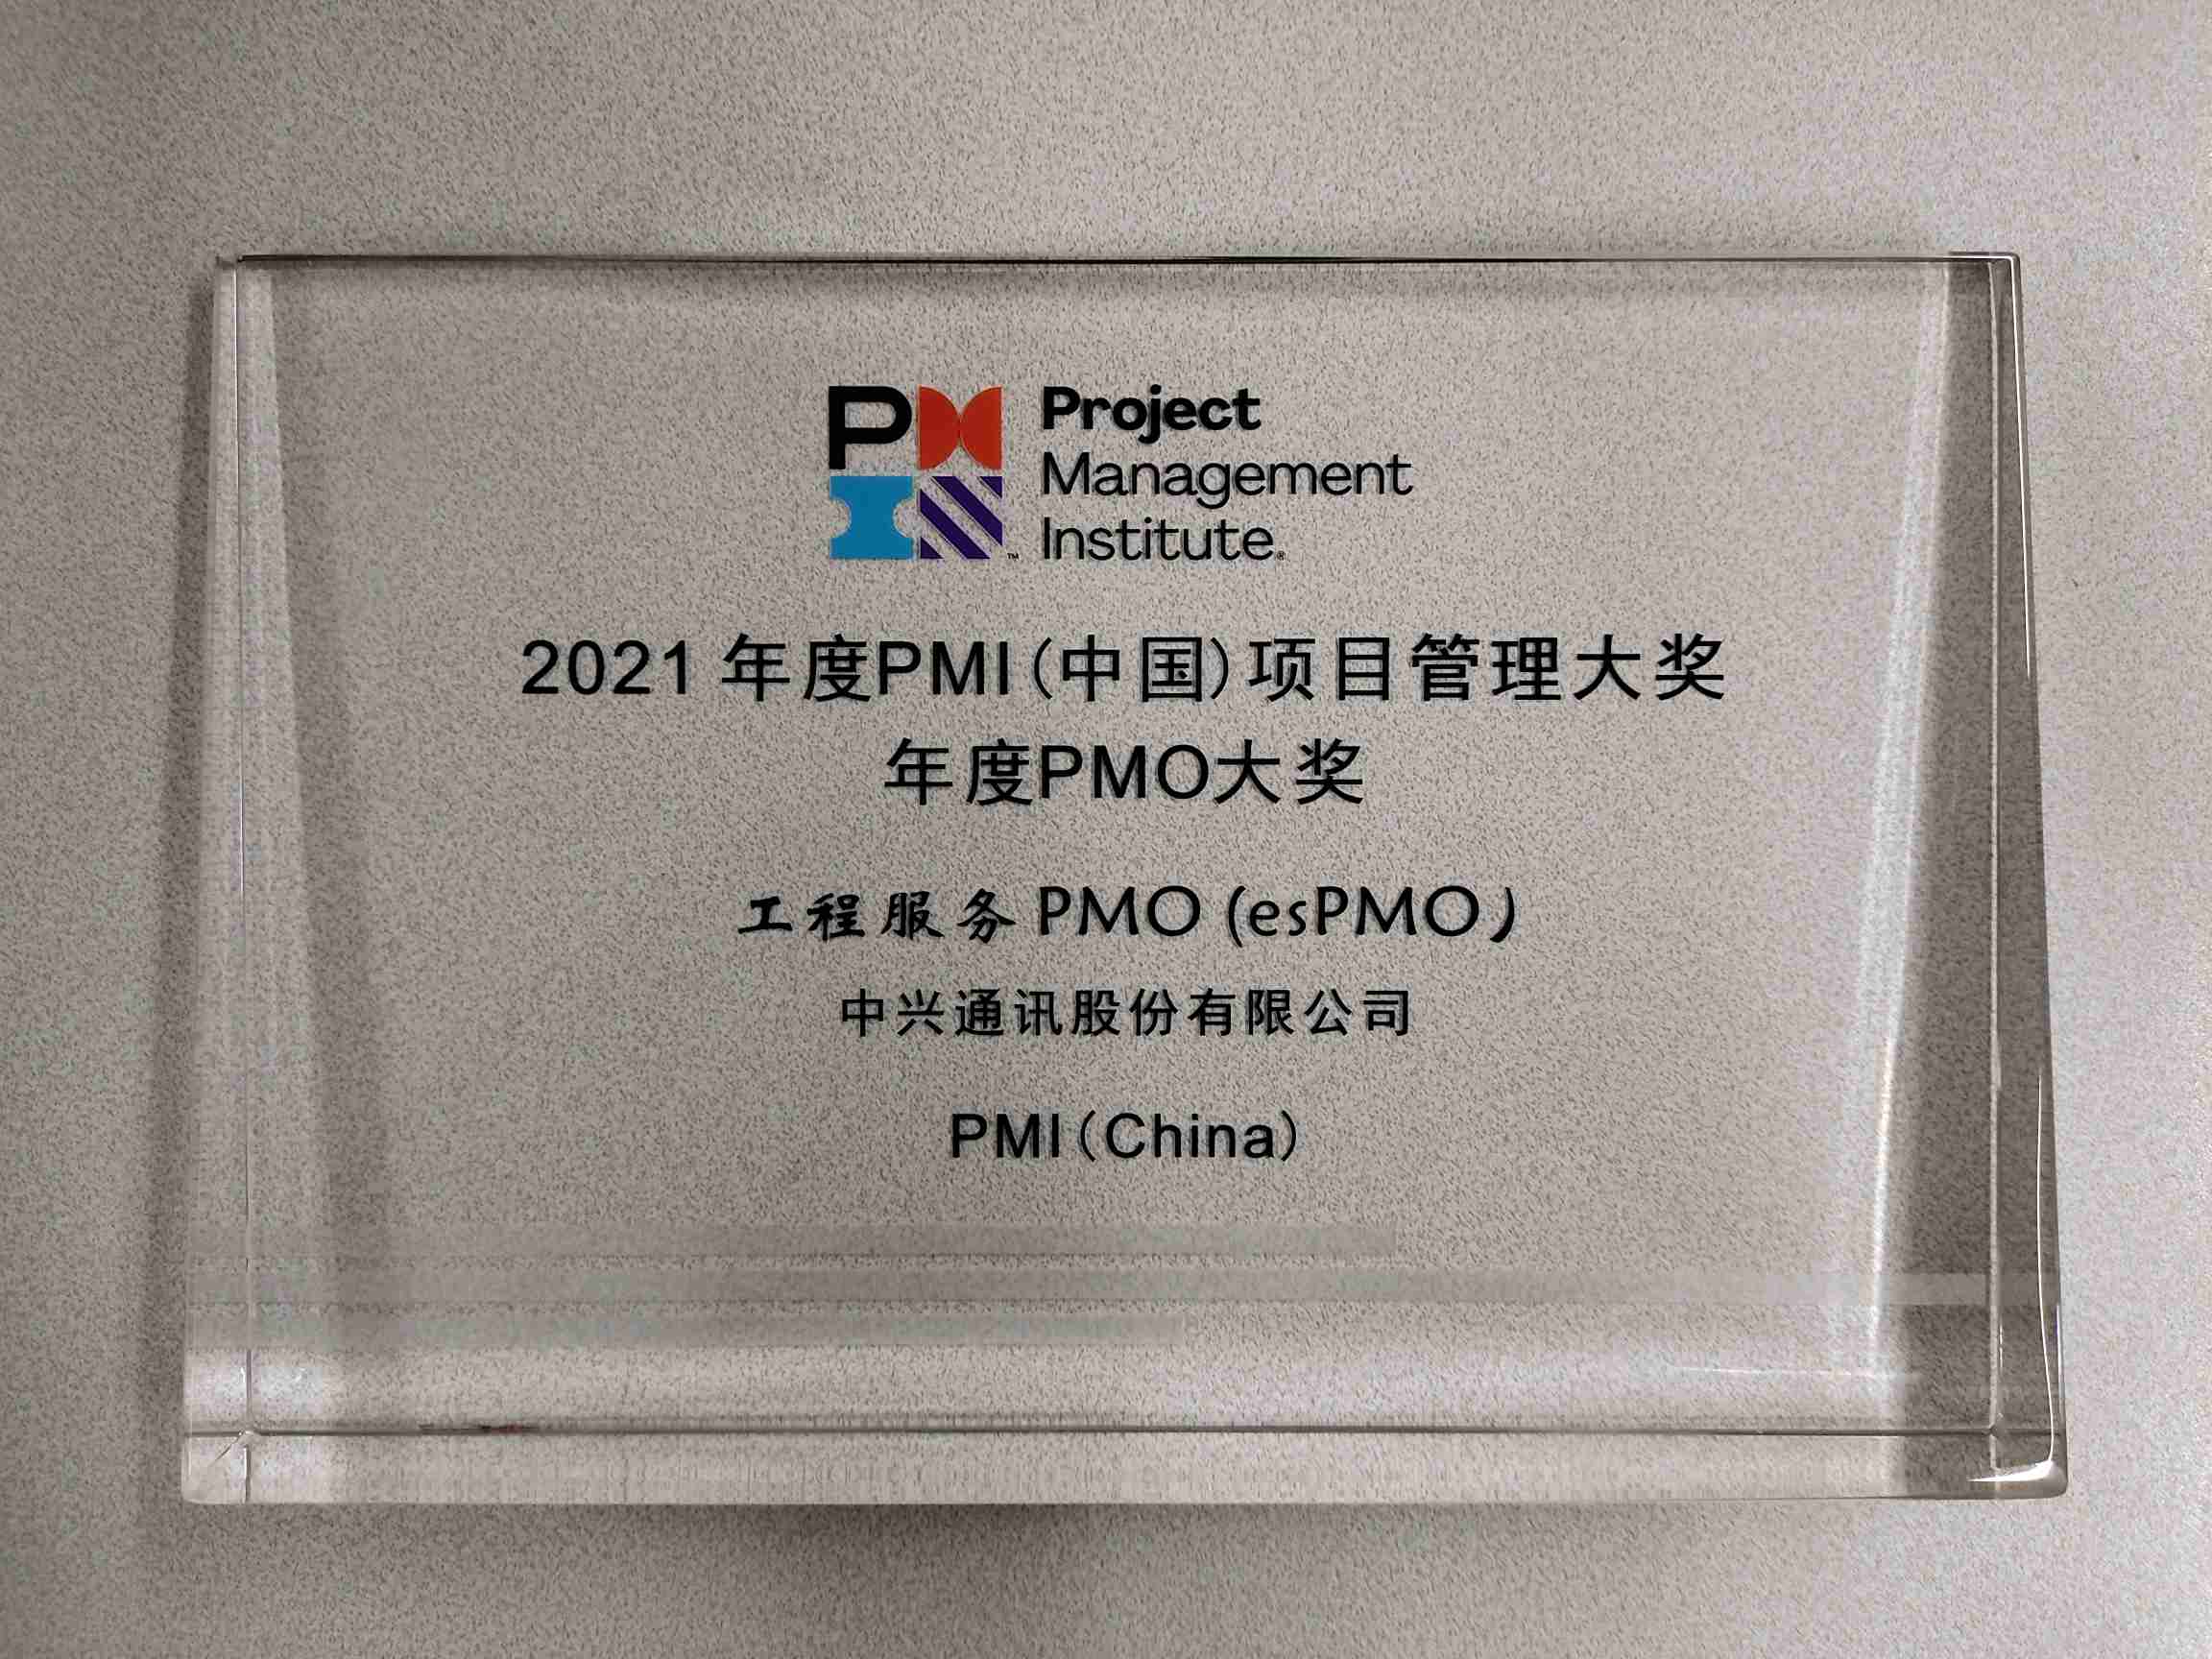 The PMO of the Year Award(1)